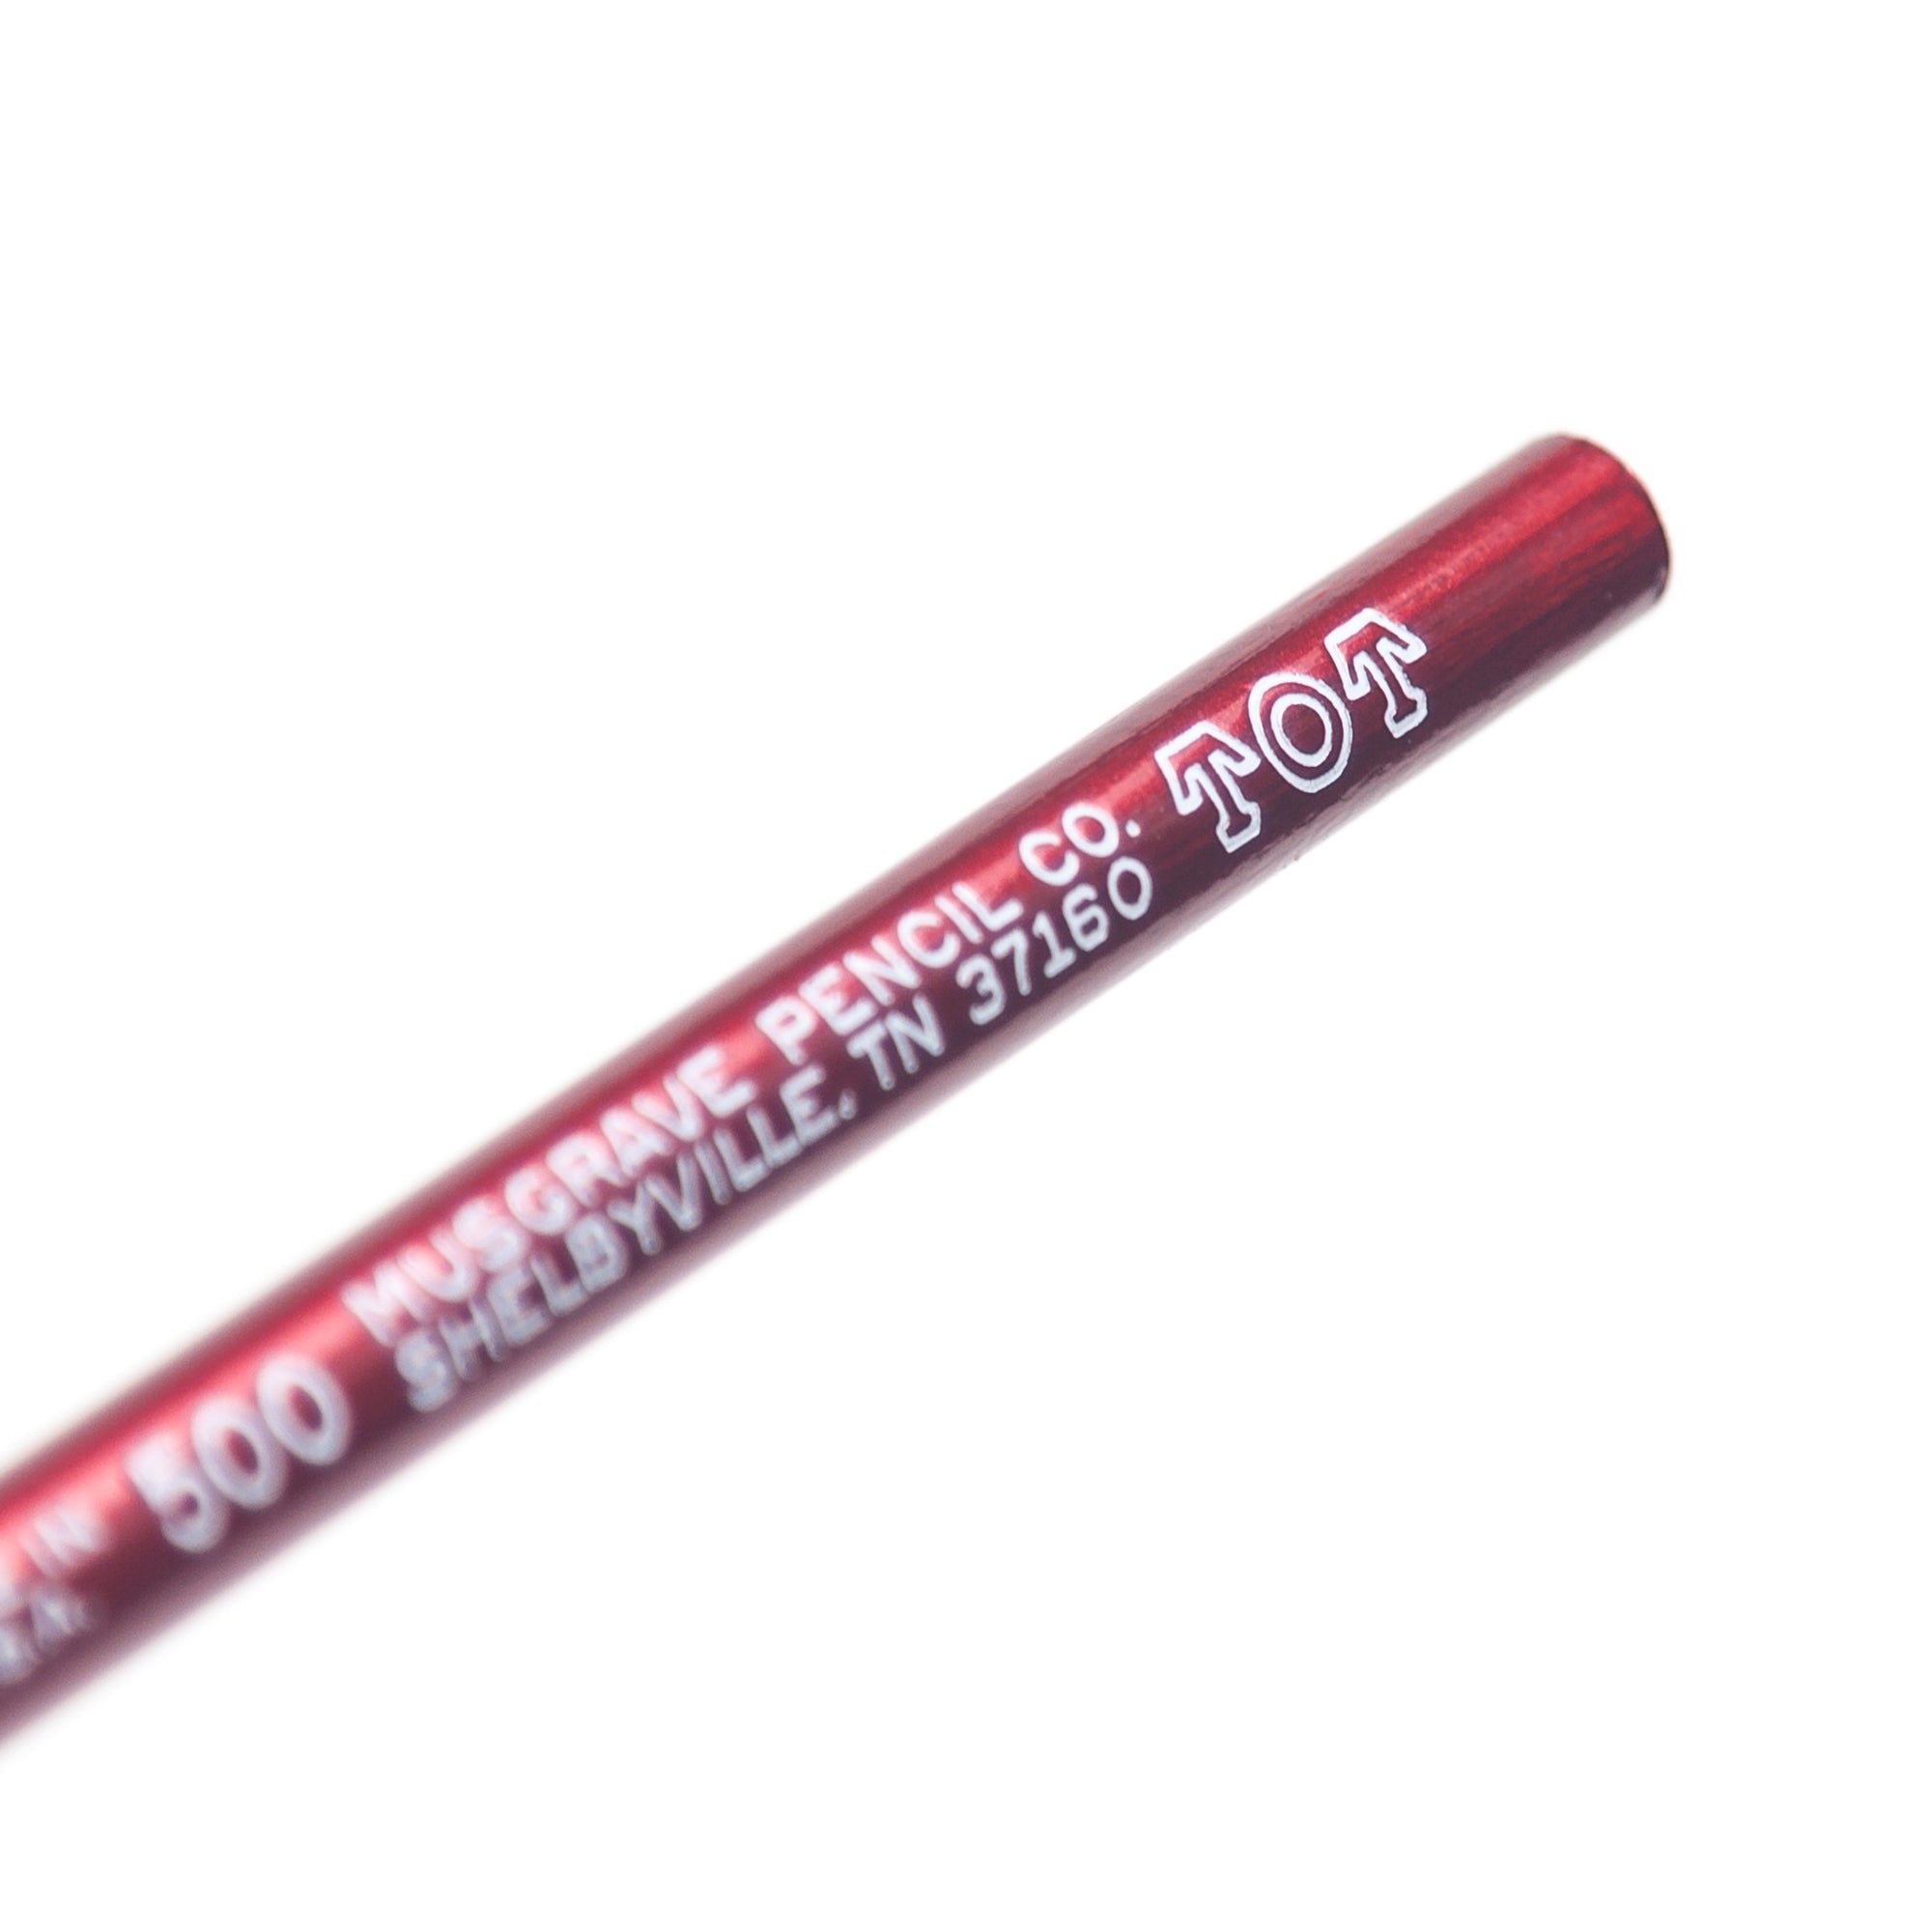 Musgrave Pencil Company Super Sports Motivational/Fun Pencils #2 Lead 12  Per Pack 12 Packs, 1 - Fry's Food Stores